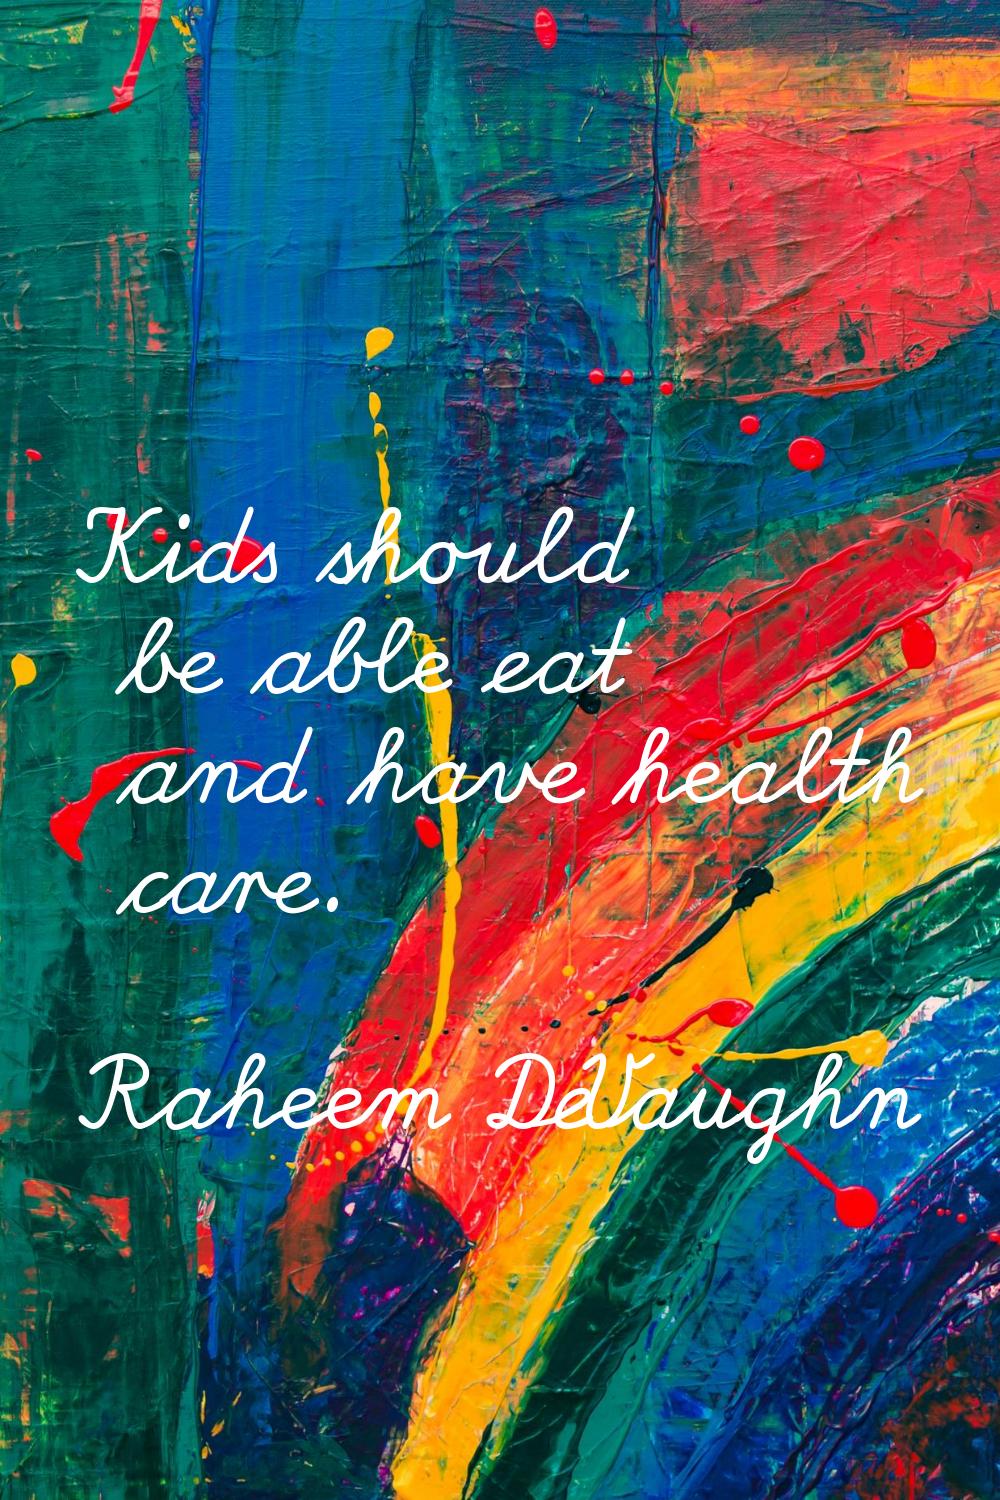 Kids should be able eat and have health care.